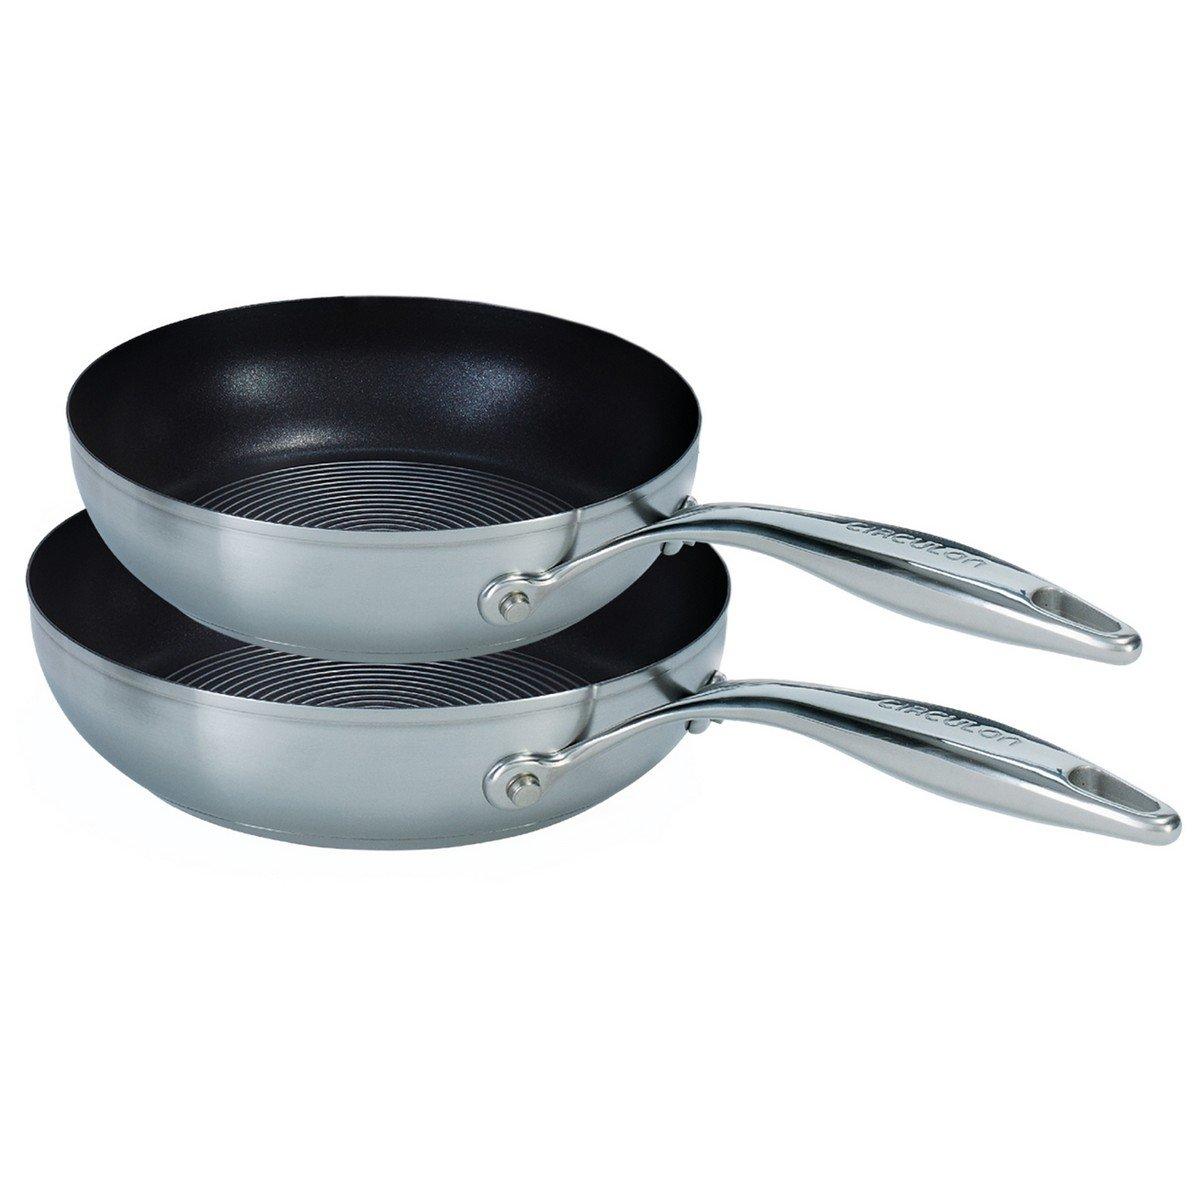 Frying Pan in Stainless Steel Durable Non Stick Cookware - Pack of 2